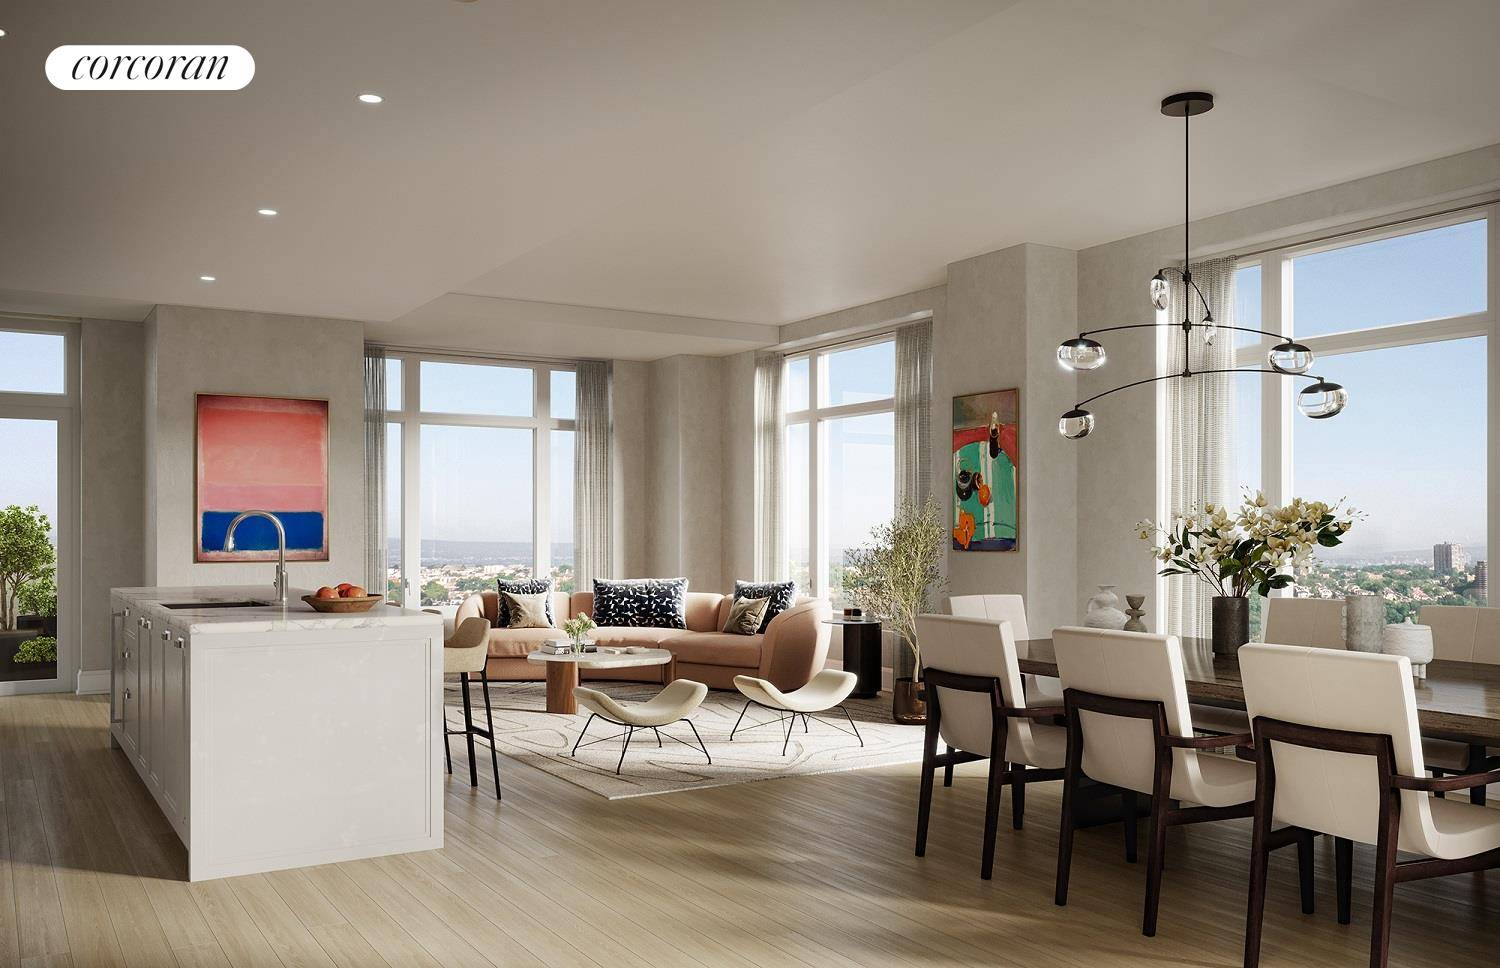 Offering unobstructed views over the Hudson River and Riverside Park, abundant light and air, and an open layout that invites stylish entertaining and gracious everyday living.